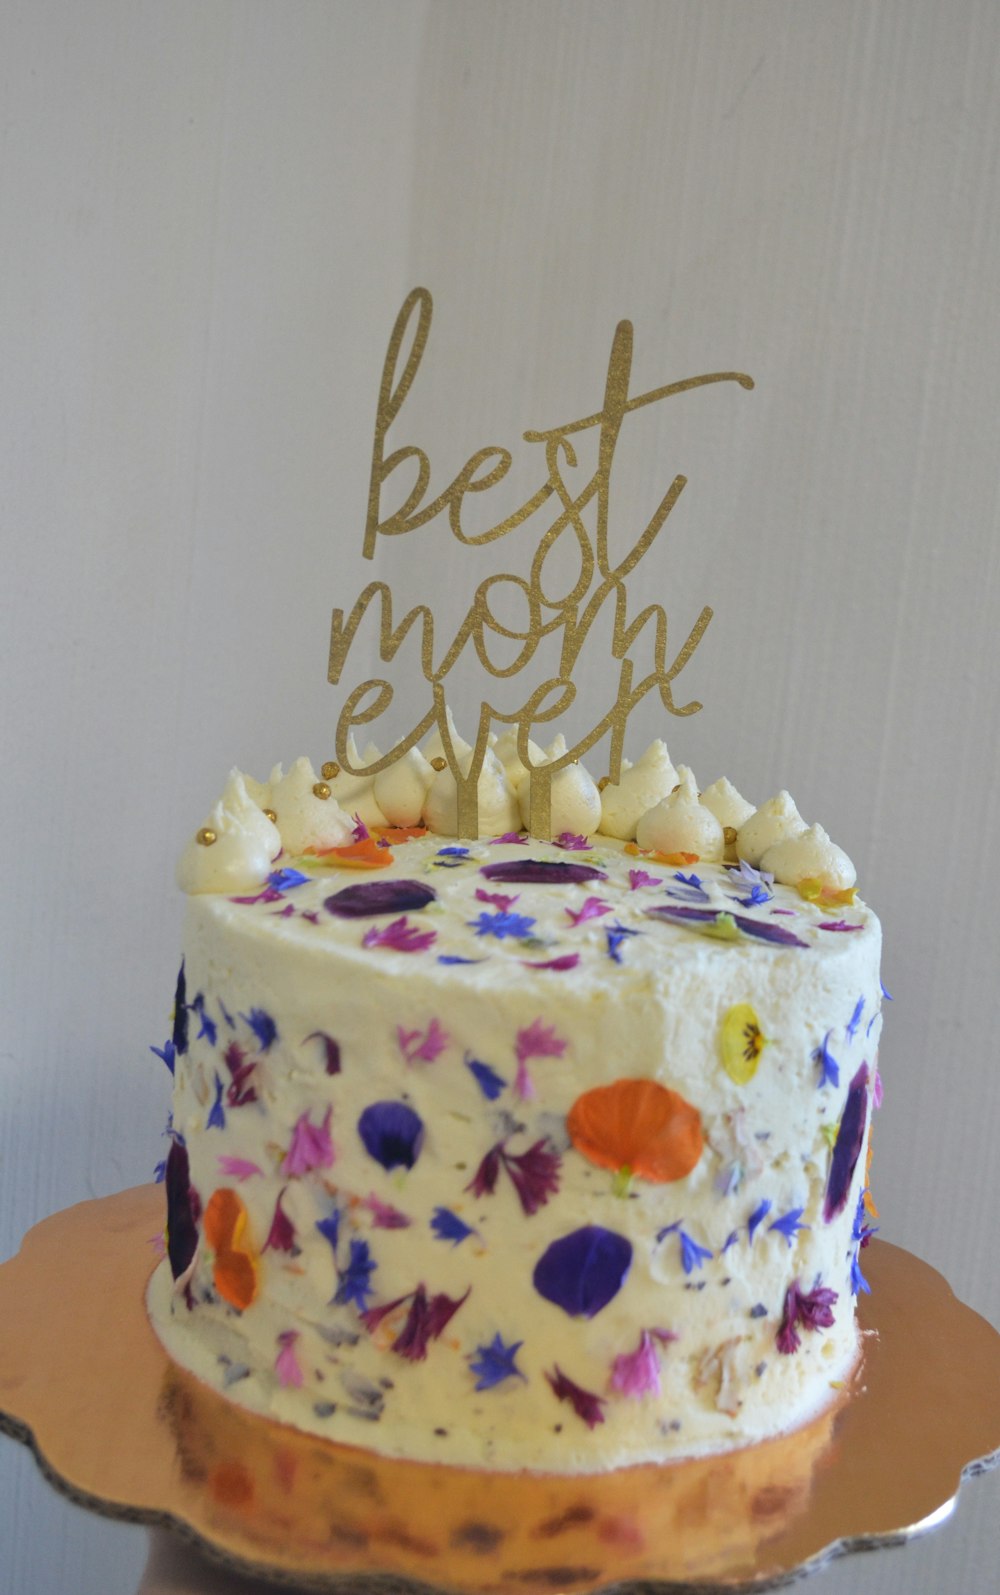 white and yellow cake with happy birthday text